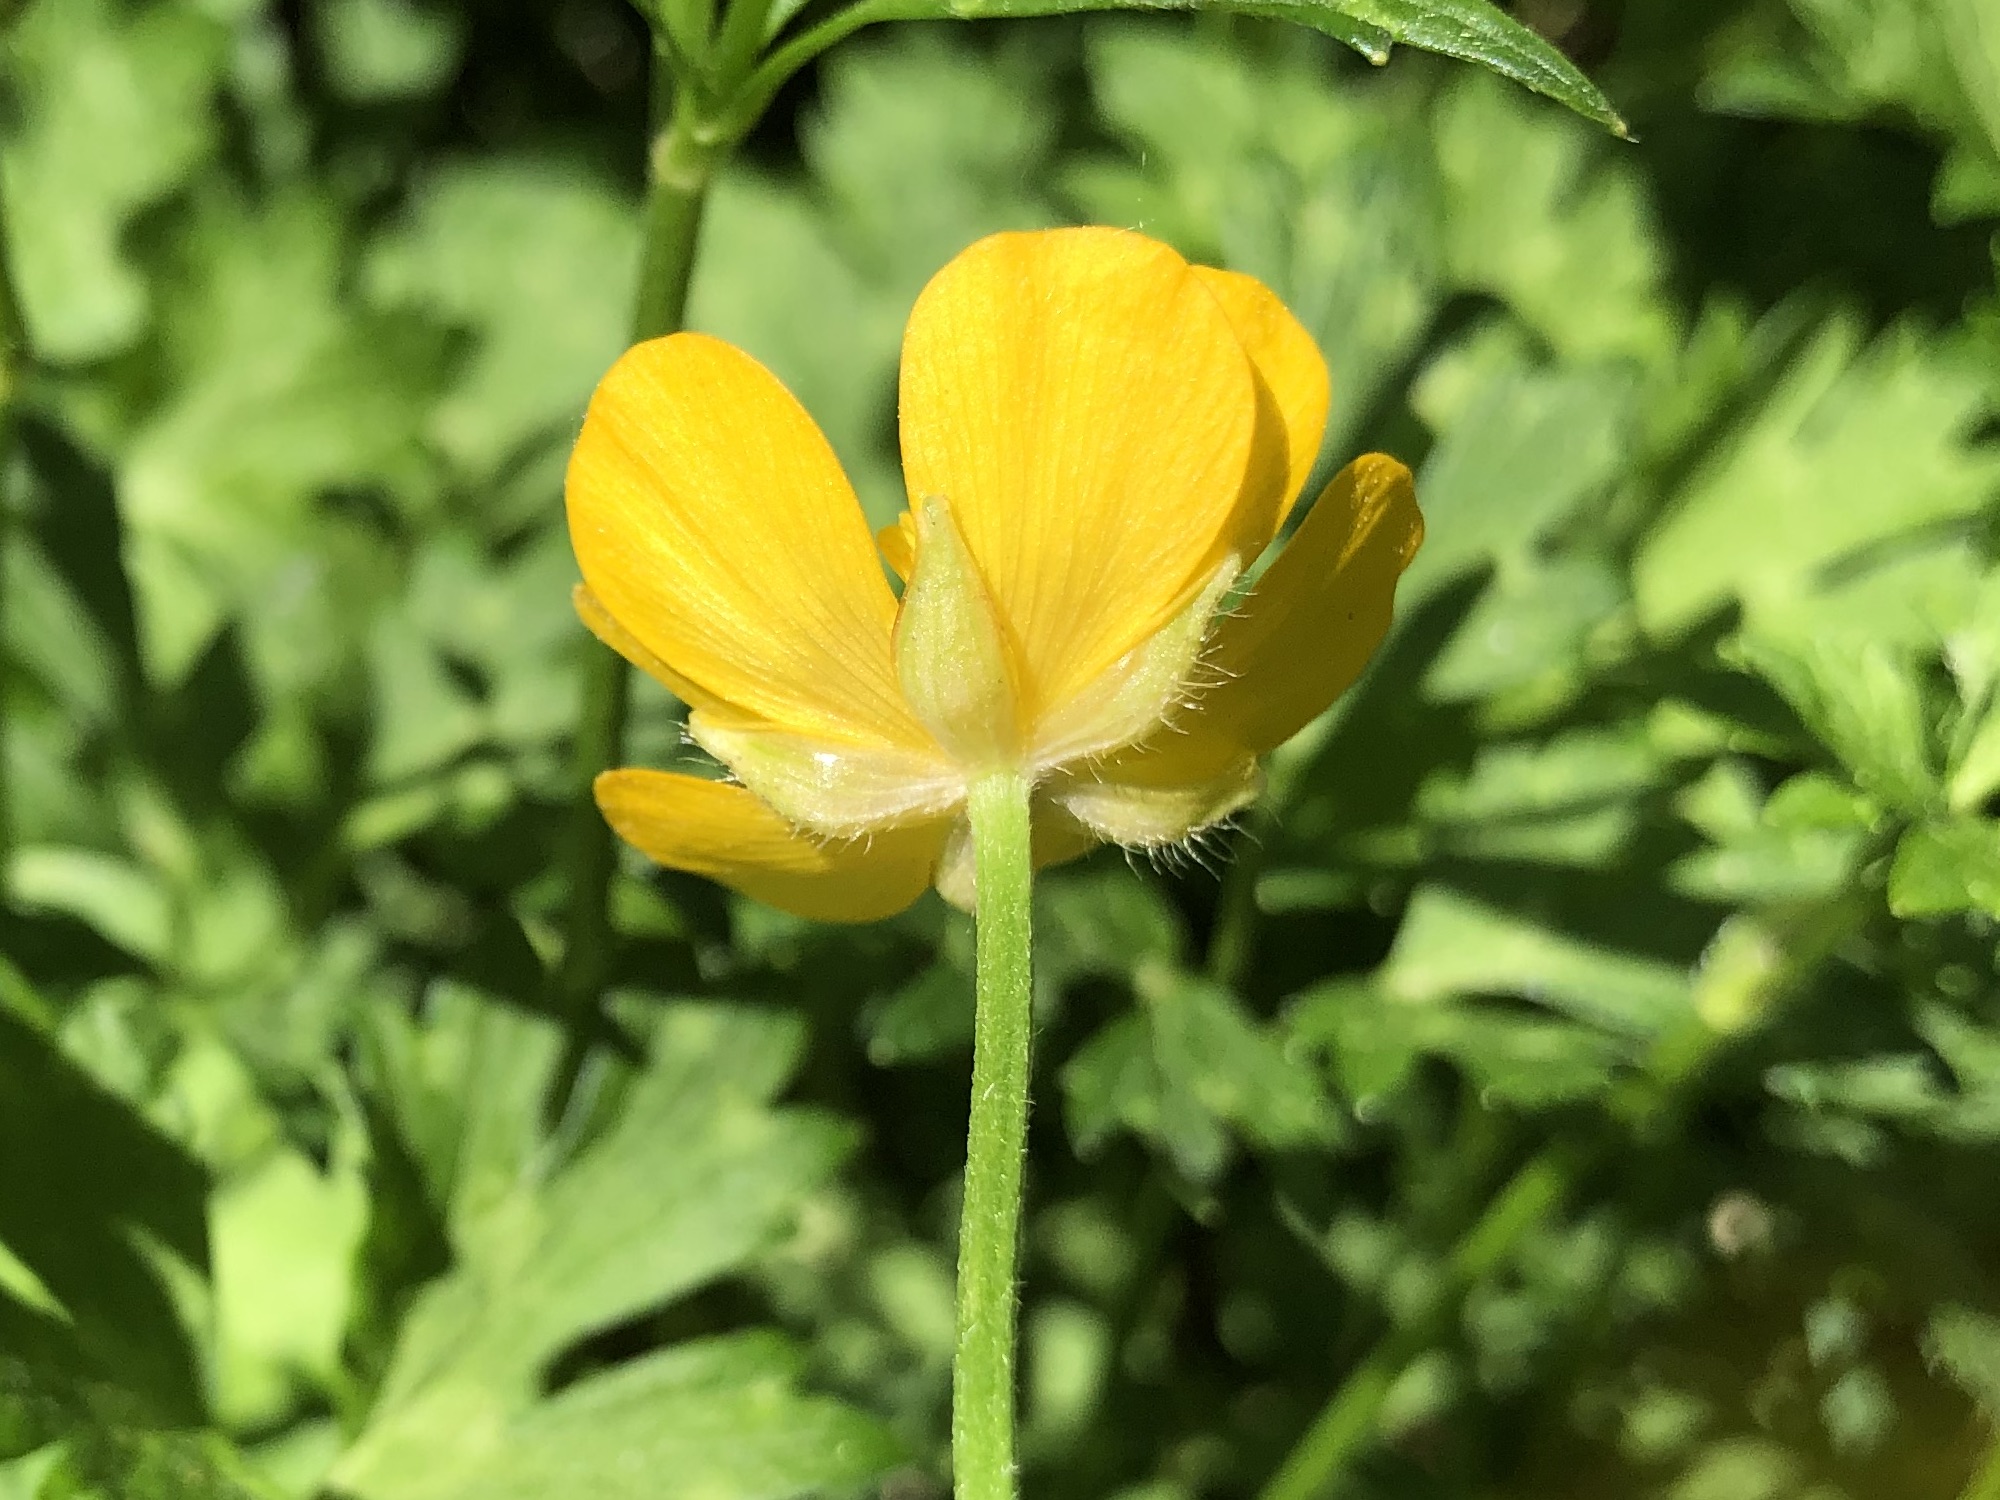 Creeping Buttercup bracts along the bike path behind Gregory Street between Commonwealth and Glenway in Madison, Wisconsin on June 3, 2022.